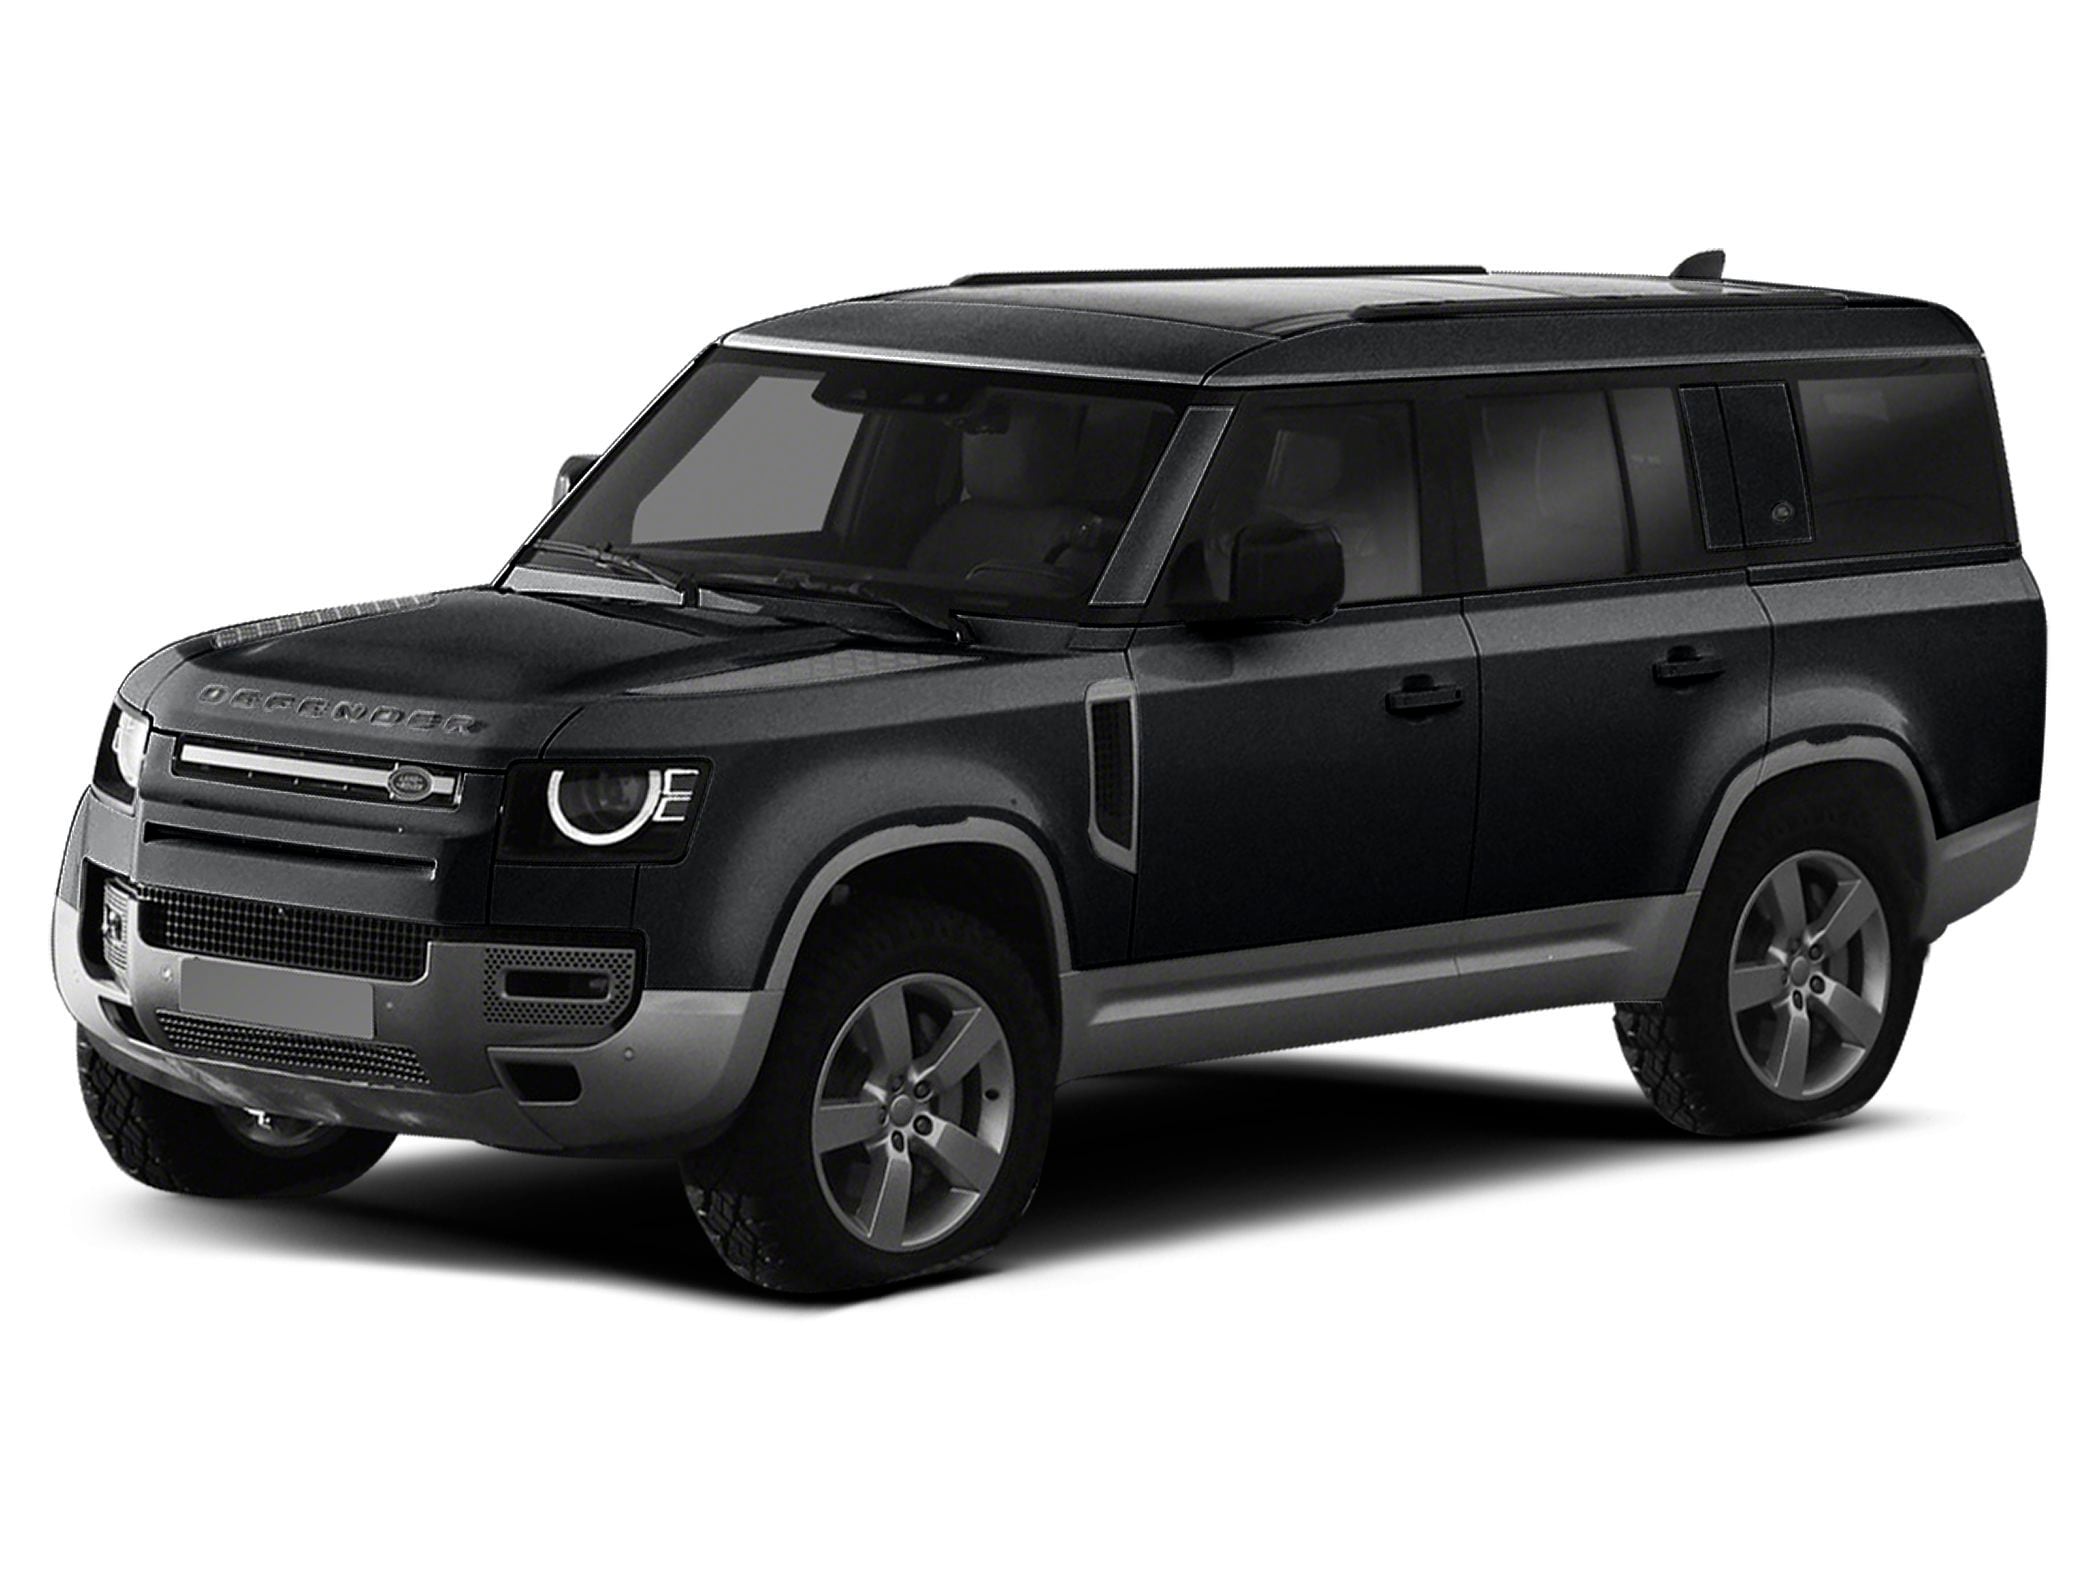 Land Rover Defender lineup expands to three vehicles with 8-seat